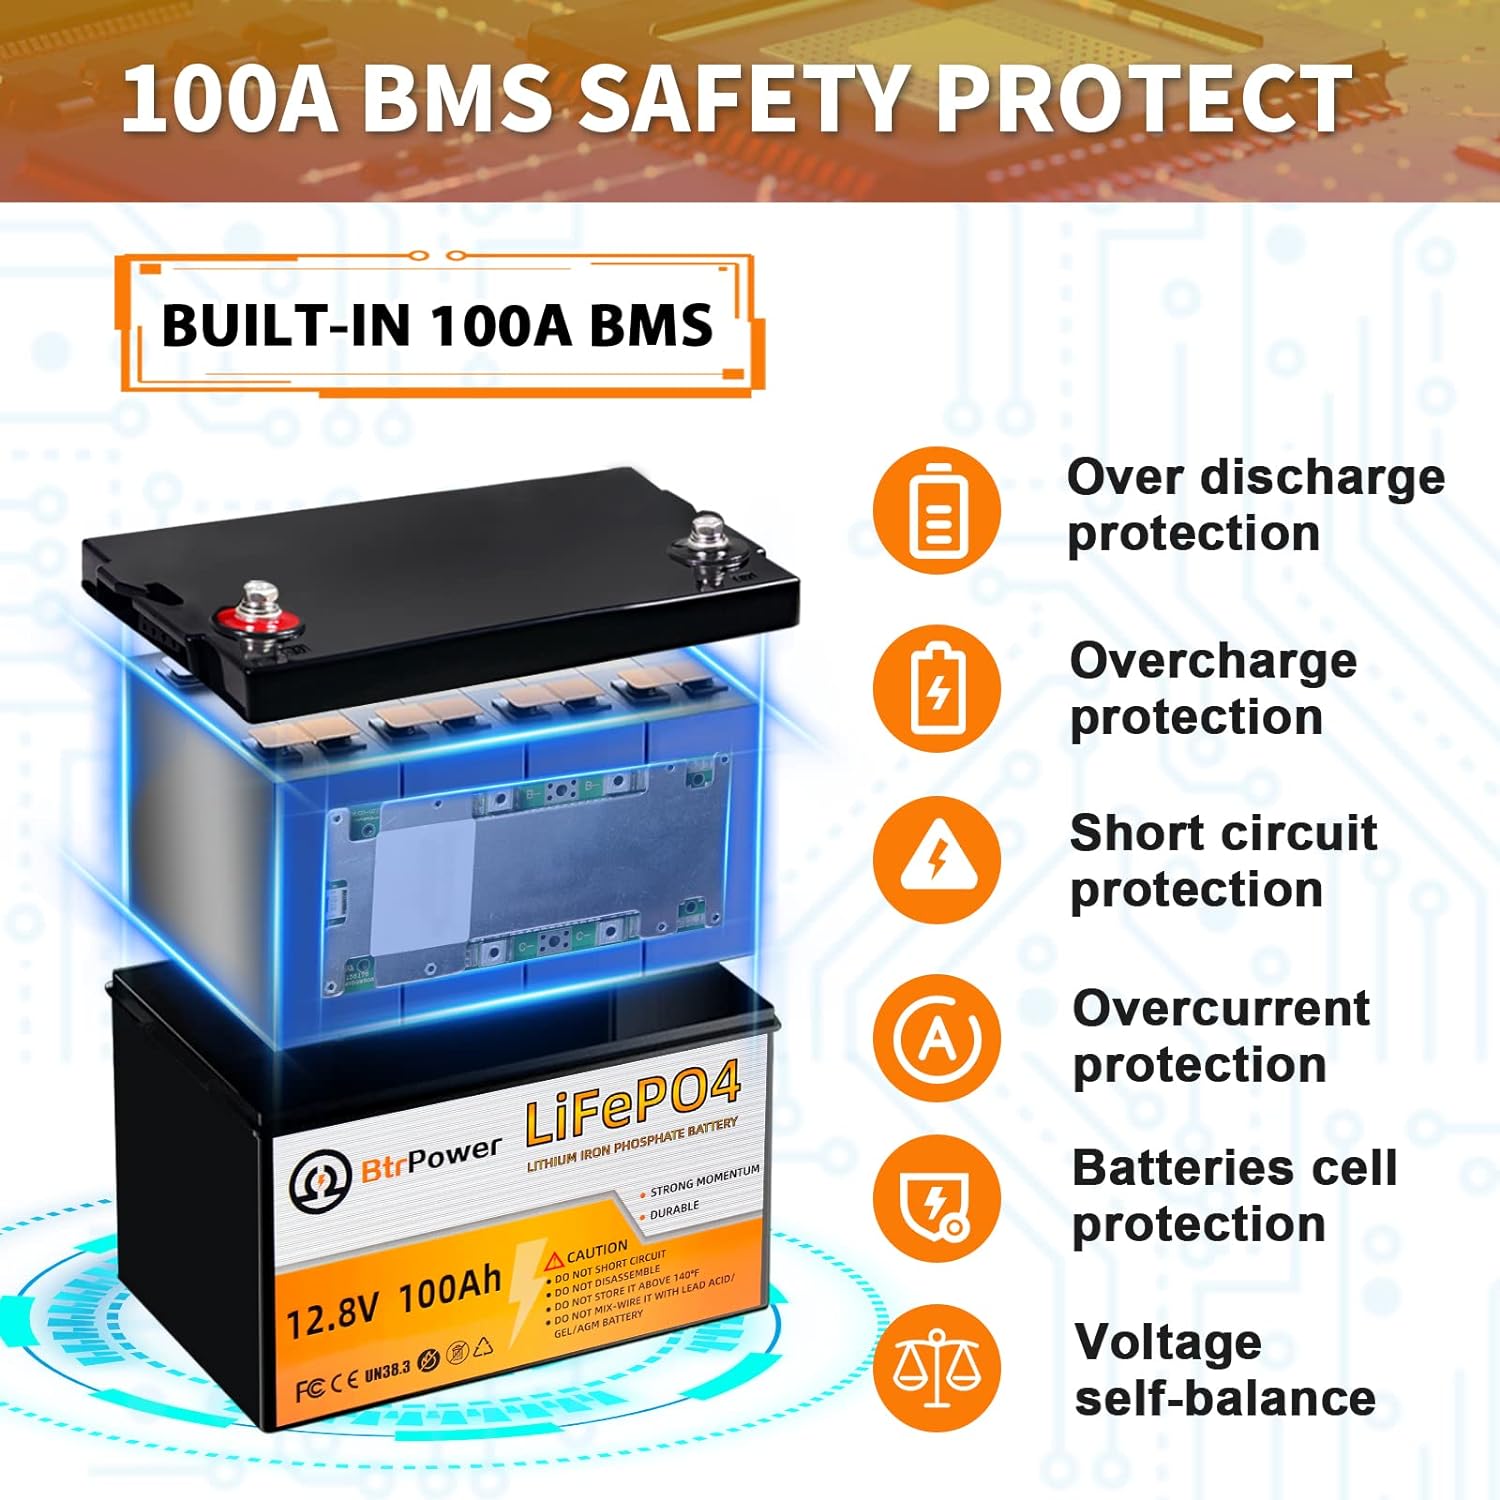 12V 100AH Lifepo4 Lithium Battery, 5000+ Cycles Deep Cycle Lifepo4 Battery with Built-In 100A BMS Fit for RV, Home Storage,Trolling Motor,Off-Grid System,Solar Power System,Marine